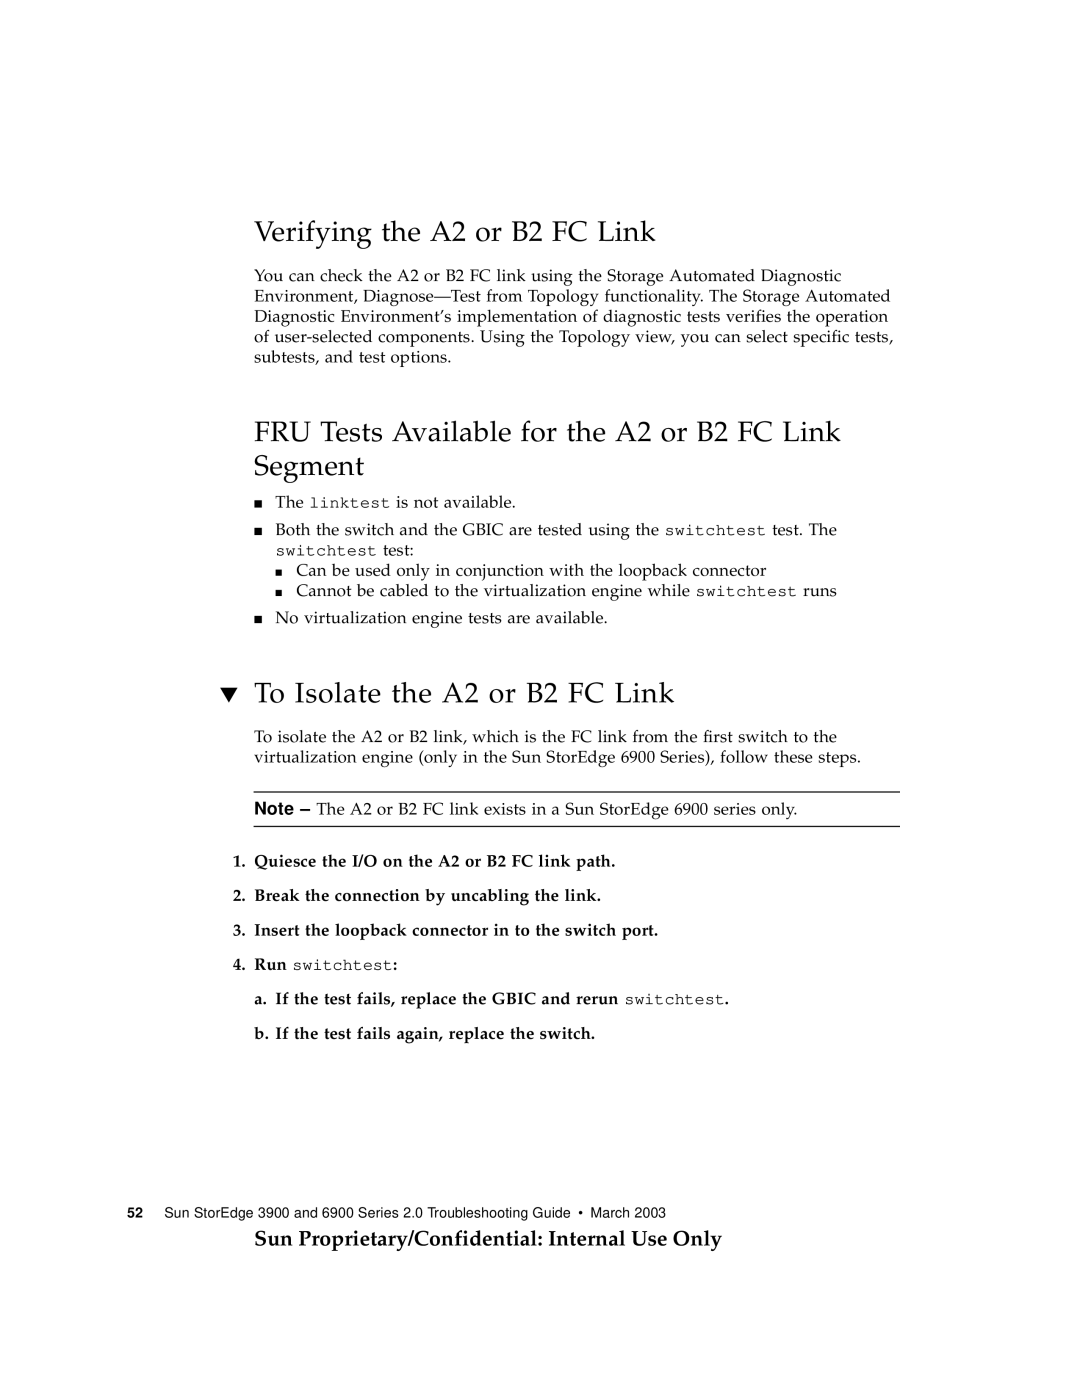 Sun Microsystems 3900, 6900 manual Verifying the A2 or B2 FC Link, FRU Tests Available for the A2 or B2 FC Link Segment 